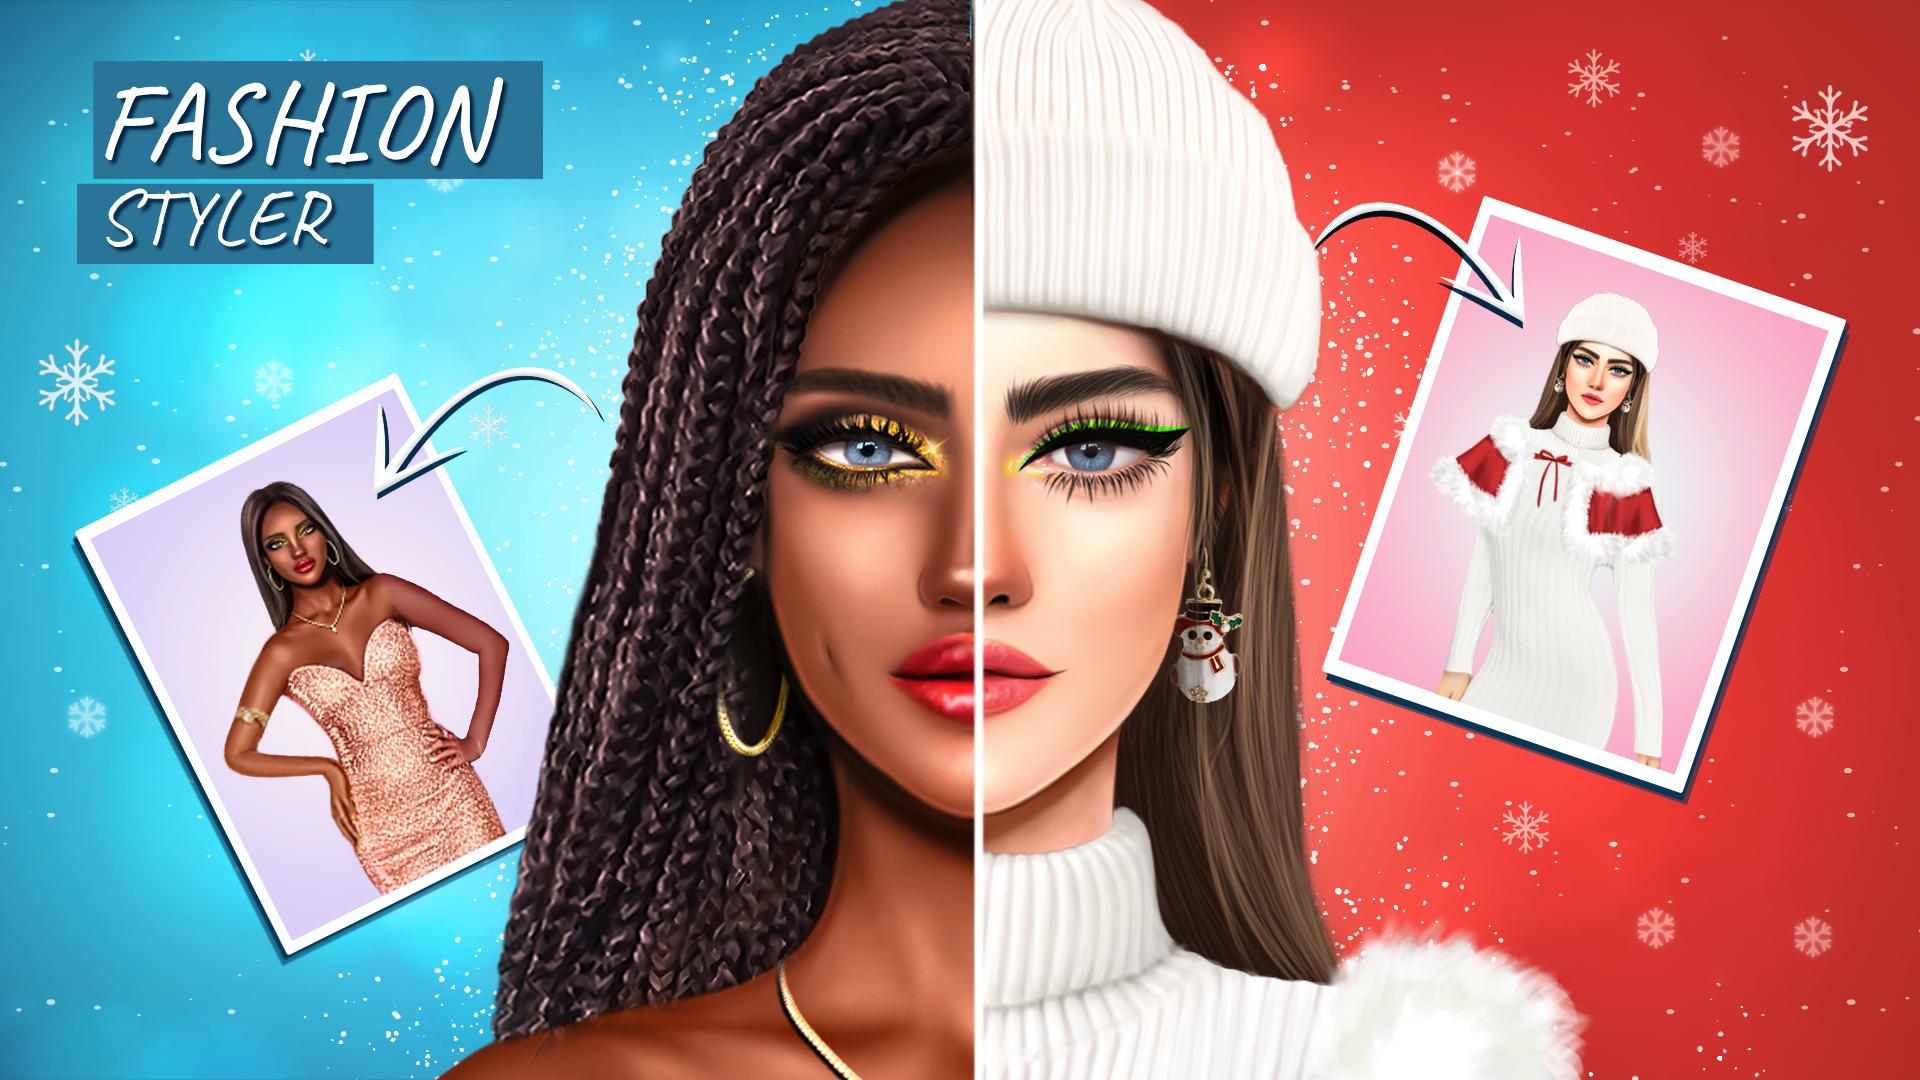 Play Fashion Games Online on PC & Mobile (FREE)